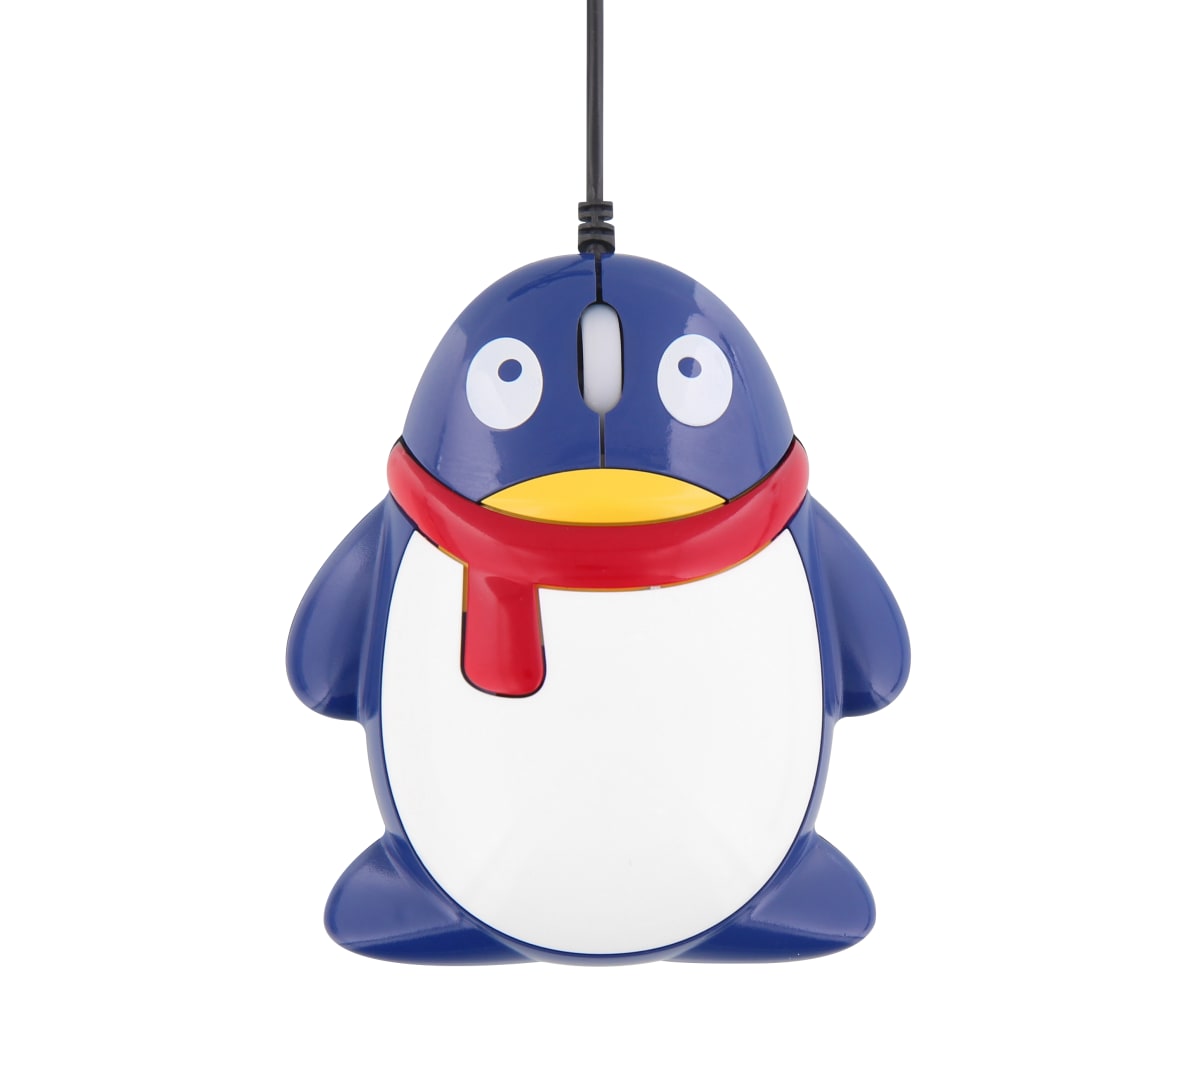 Penguin design - KID wired mouse